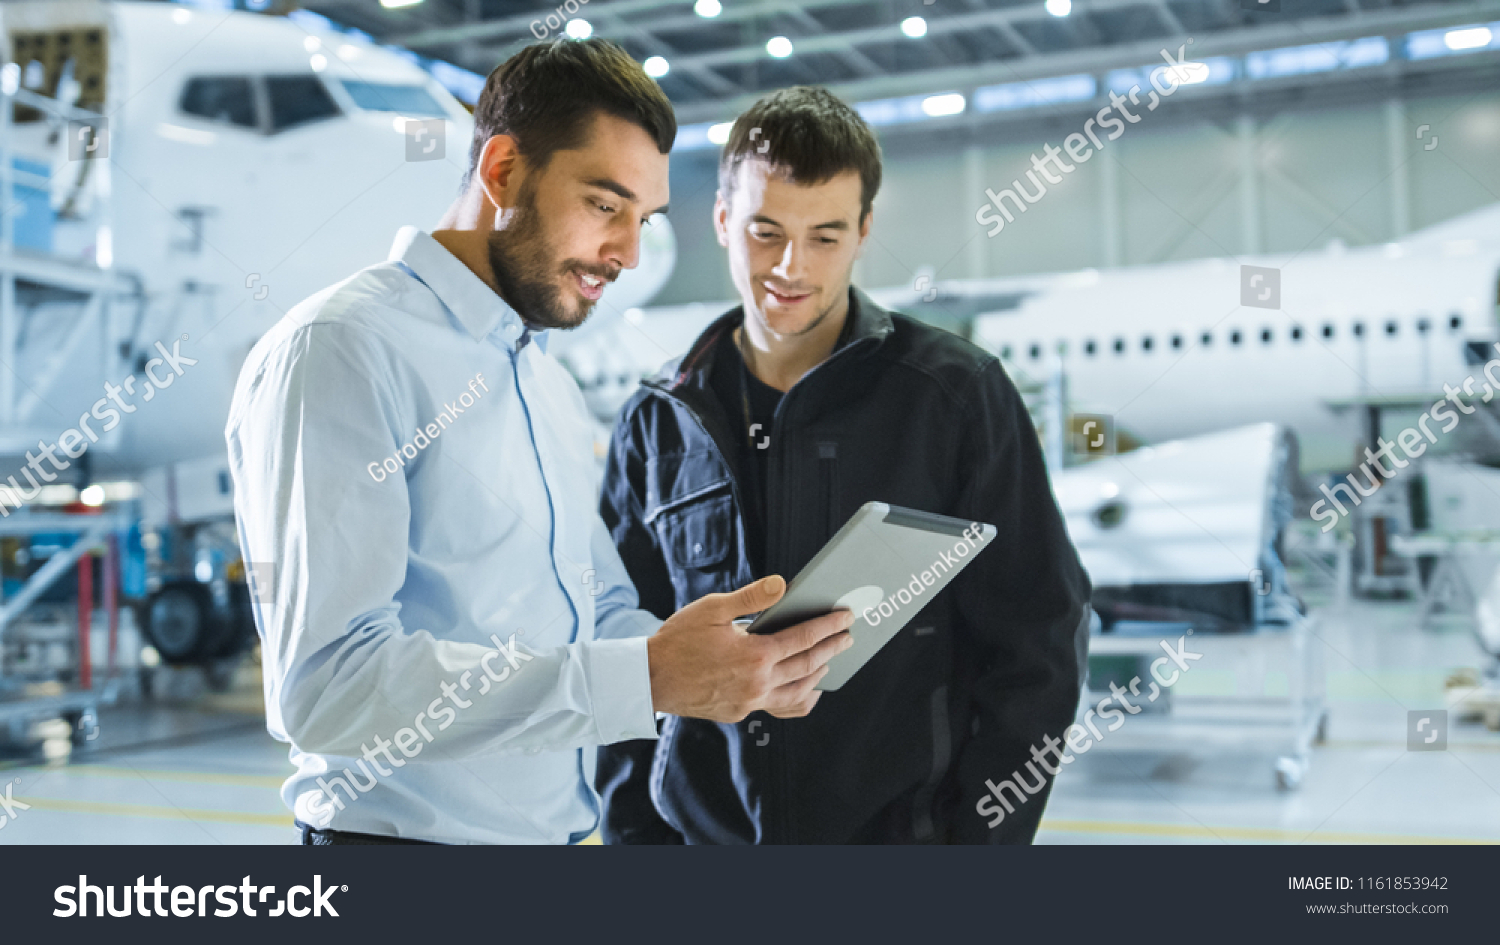 Aircraft Maintenance Worker and Engineer having Conversation. Holding Tablet. #1161853942